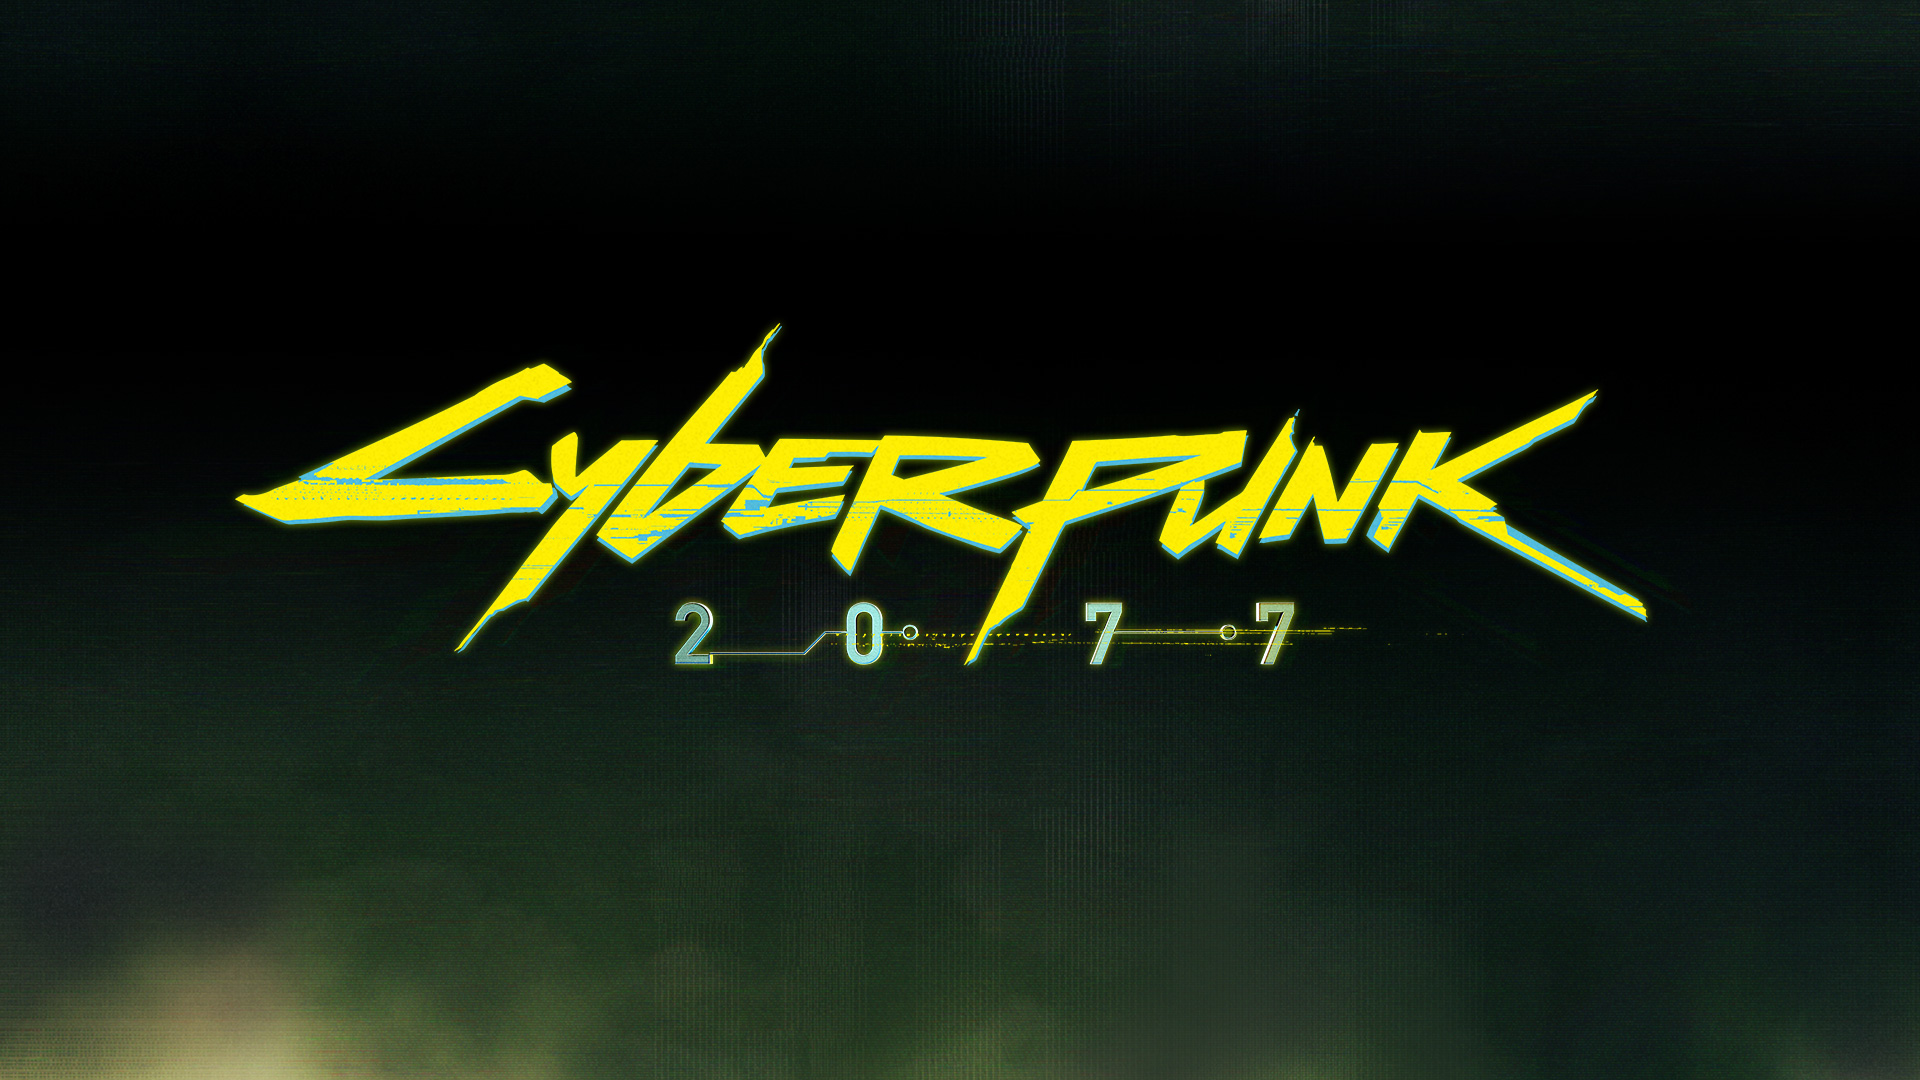 Rumor : Cyberpunk 2077 to Have Appearance at E3